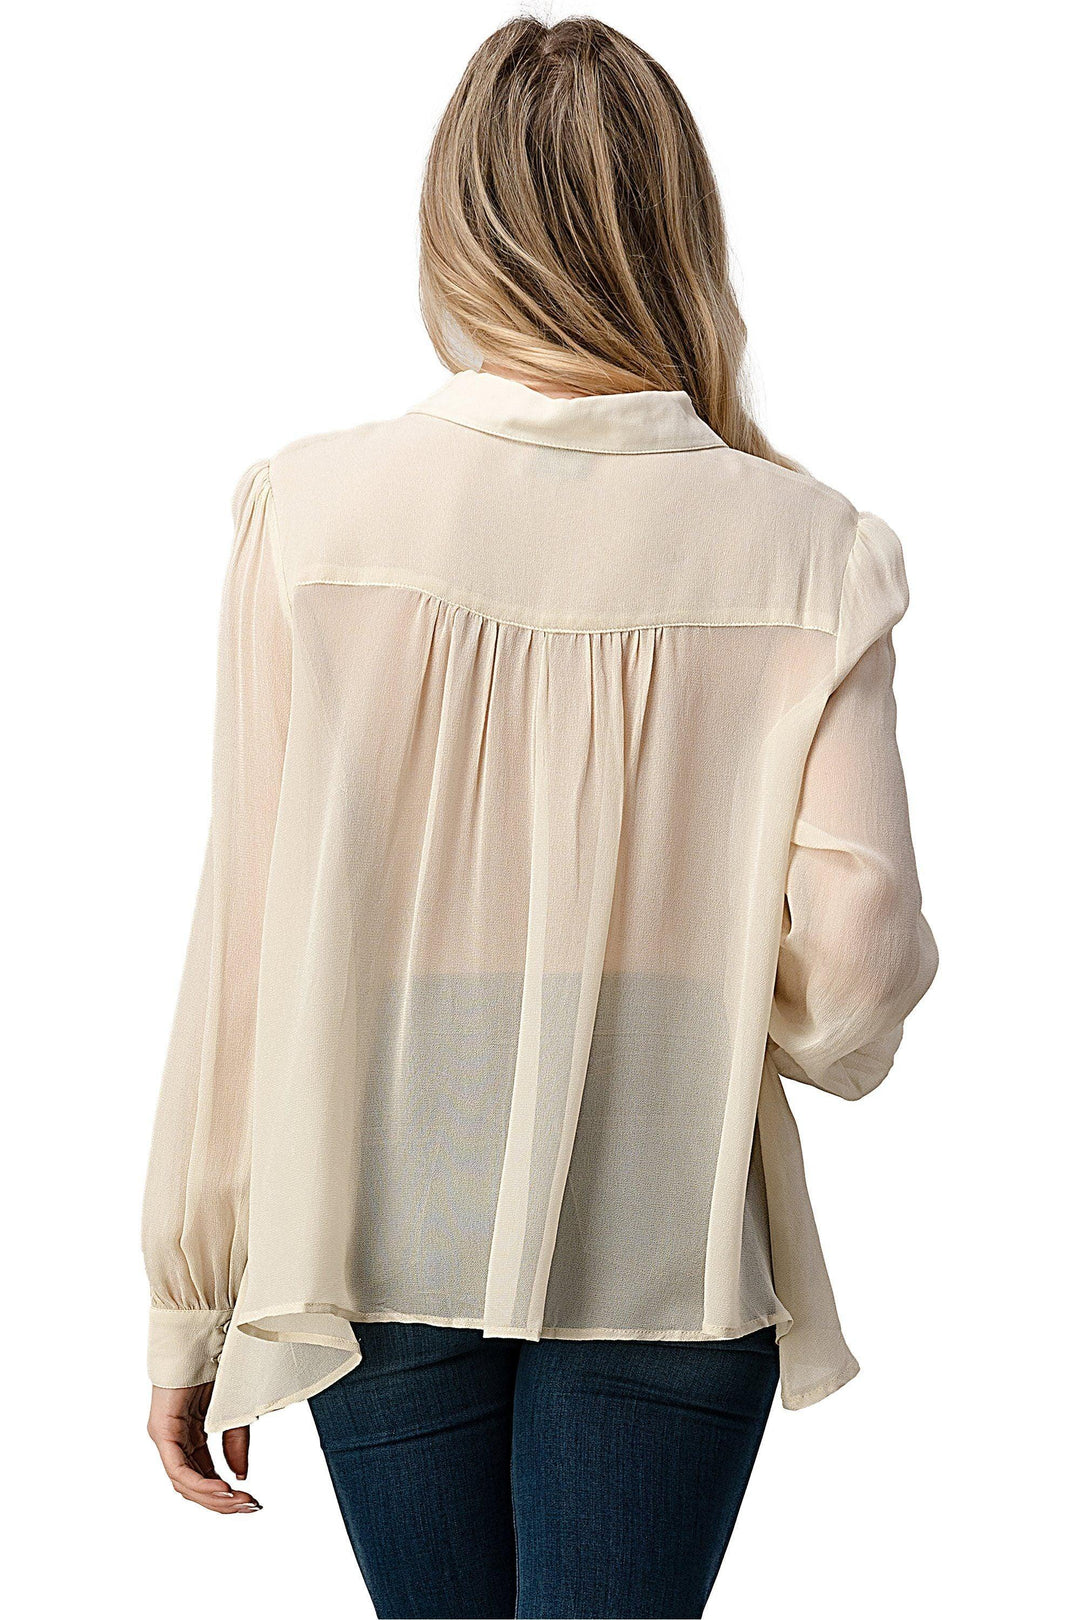 Mesh Blouse Shirt Top With Beaded Jewel Trim - Brand My Case